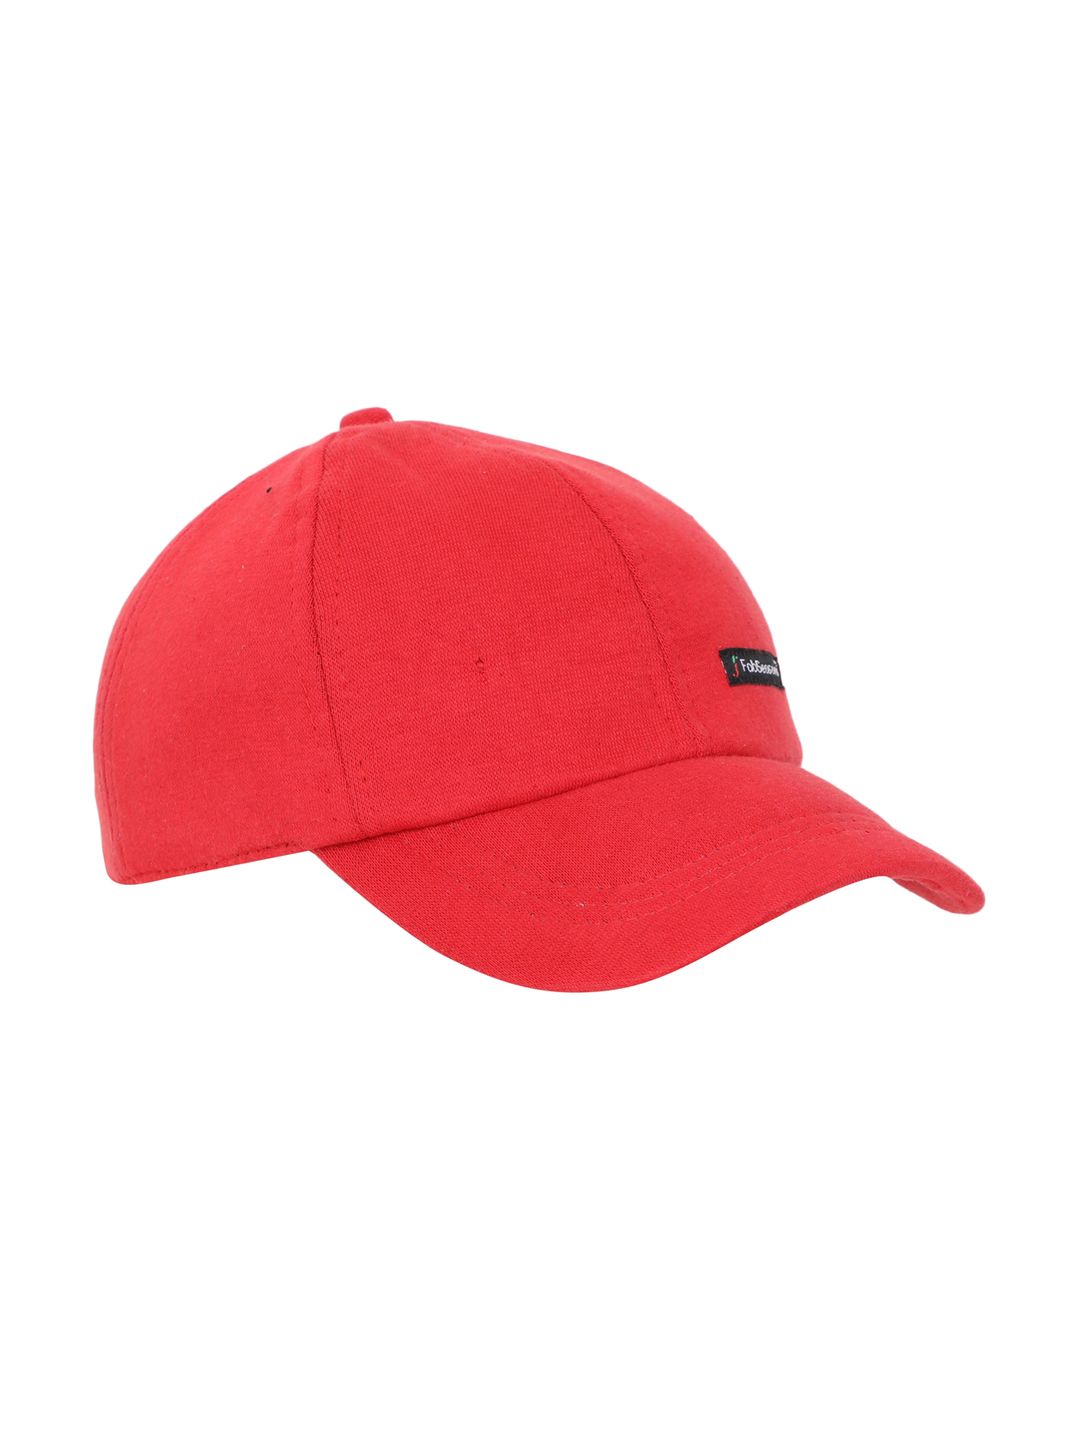 FabSeasons Unisex Red Solid Baseball Cap Price in India